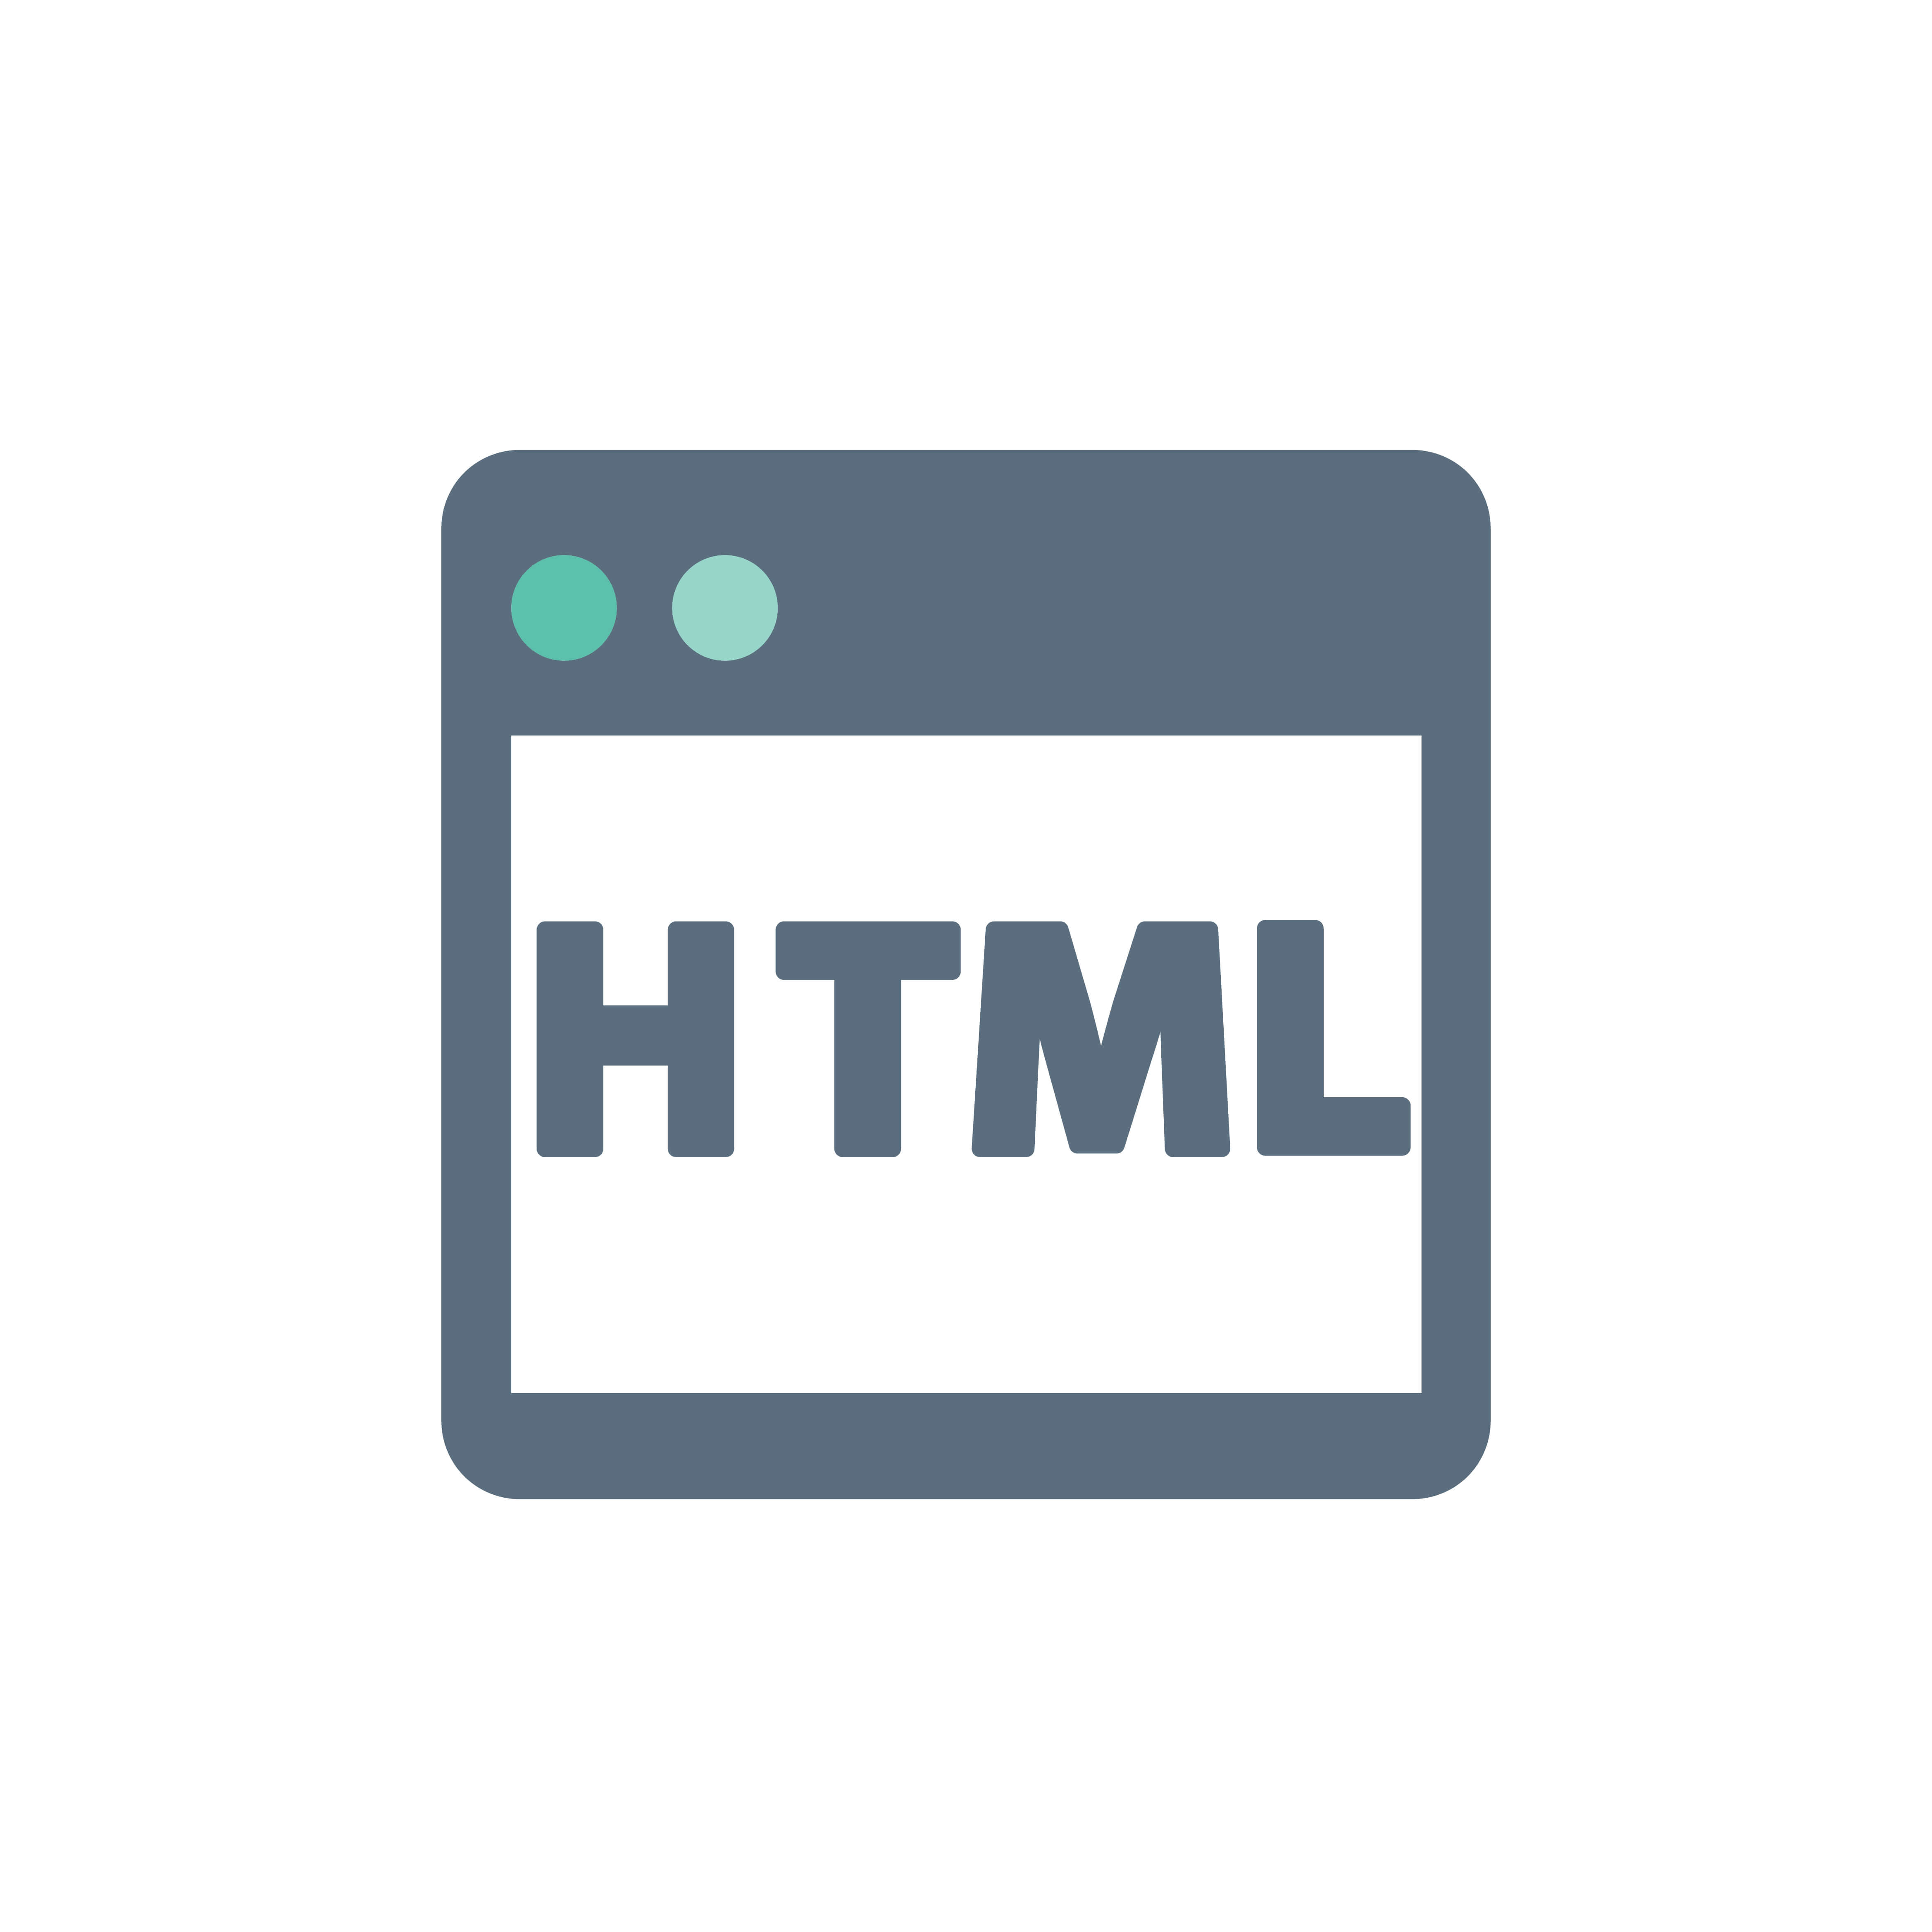 HTML becoming obsolete